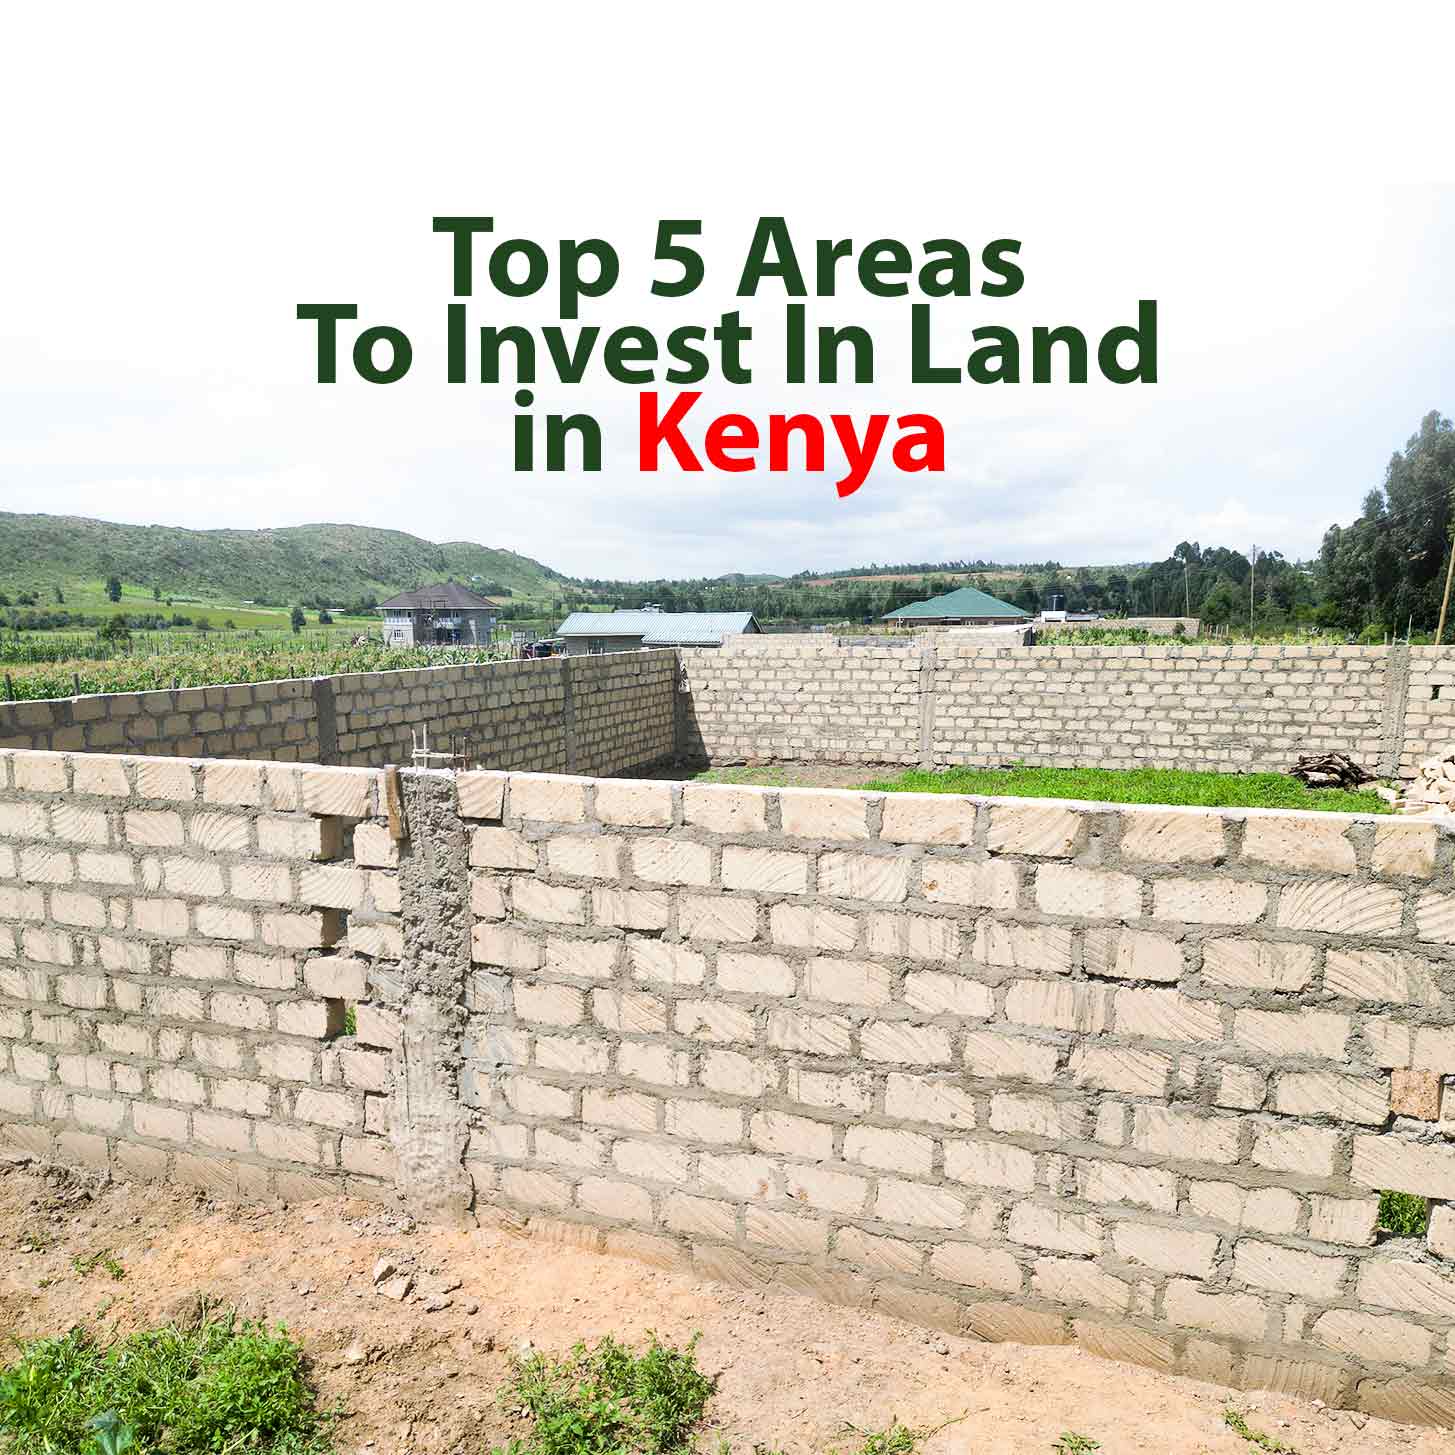 Top 4 Areas in Kenya To Invest in Real Estate With High Returns